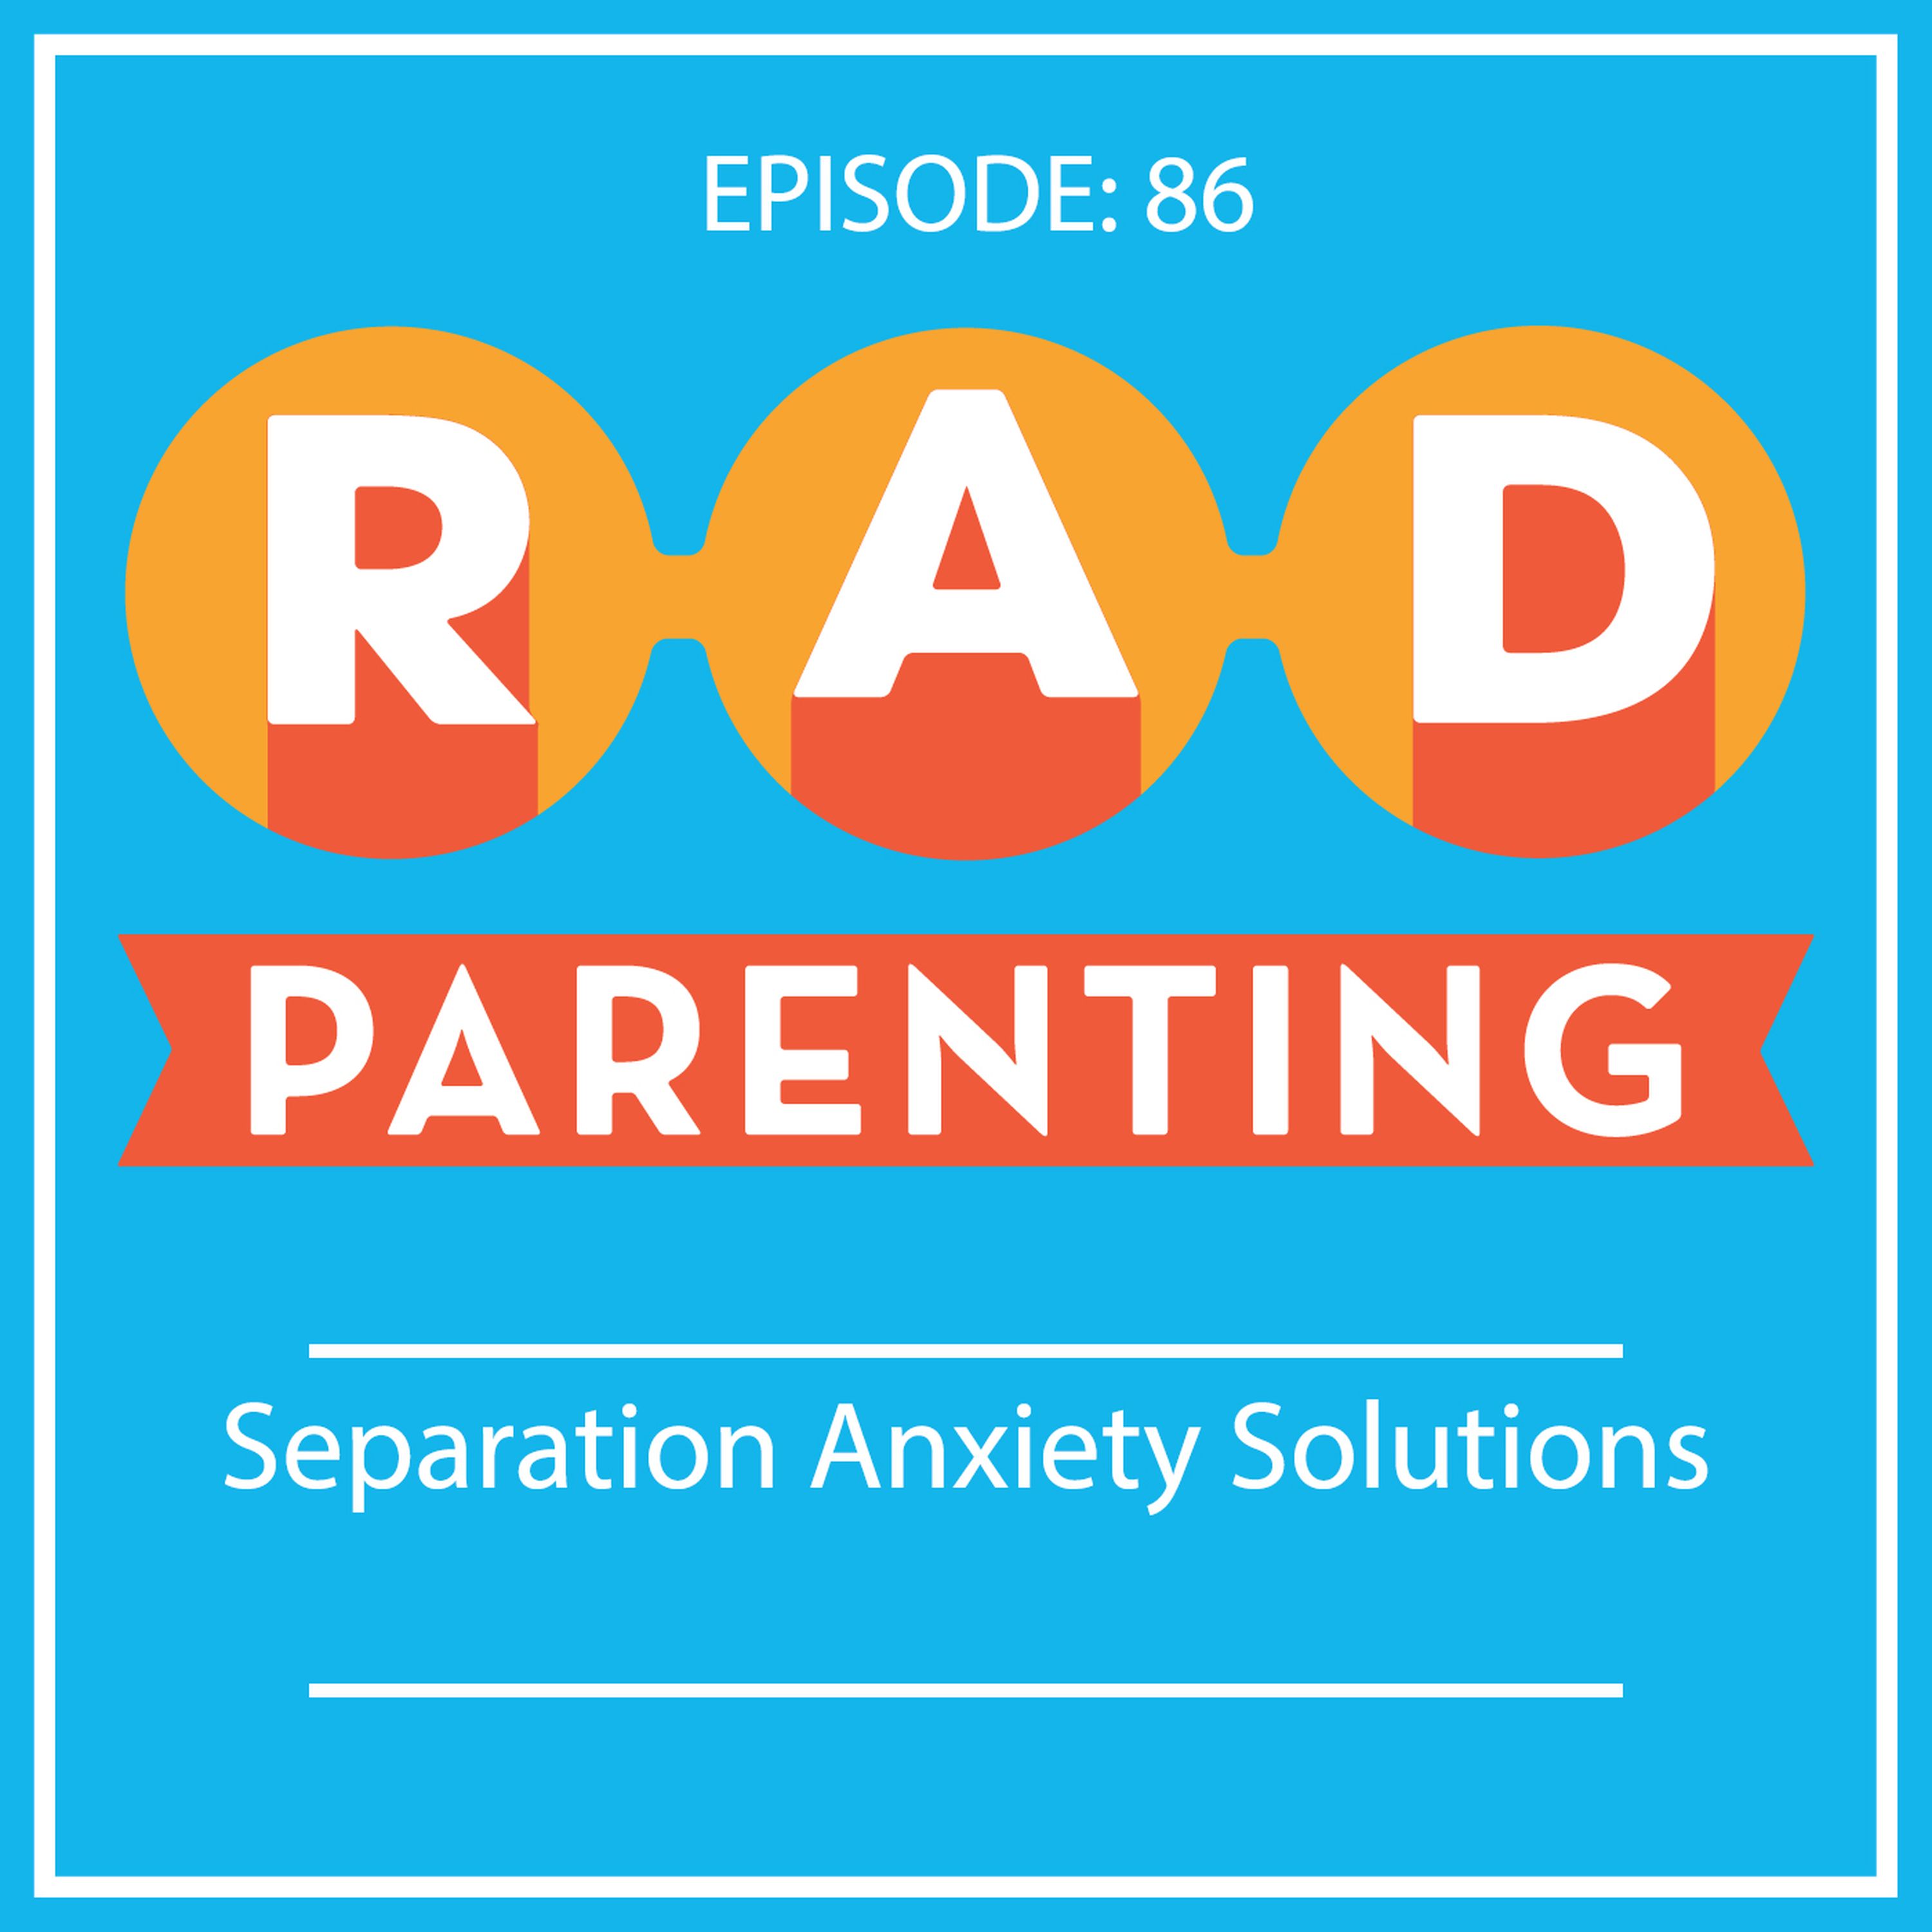 Separation Anxiety Solutions